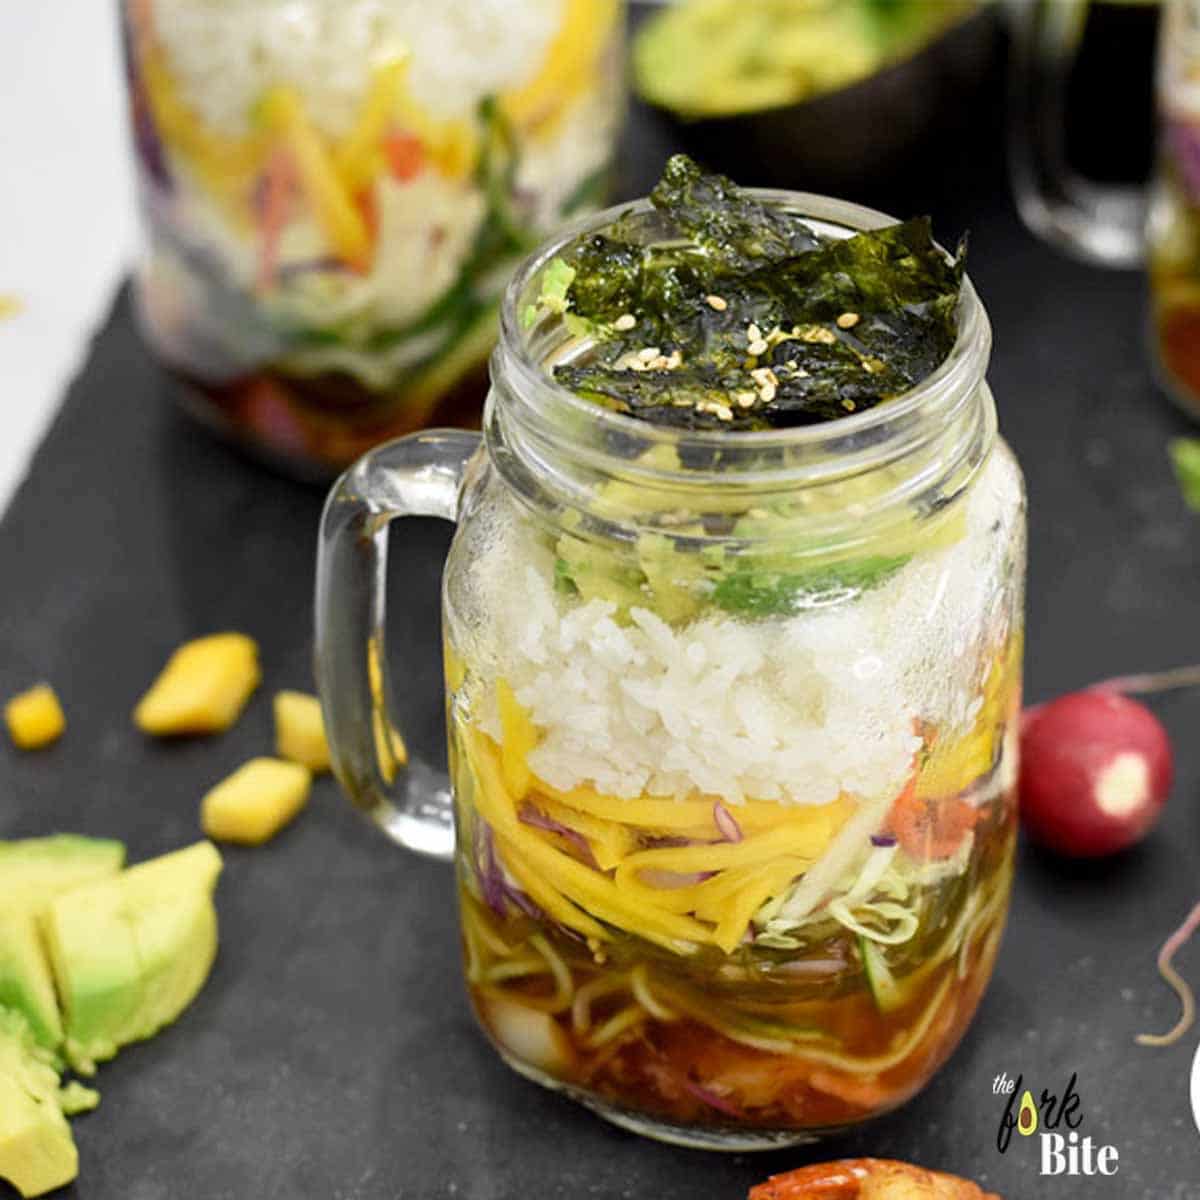 Want to punch-up your lunch? Sushi in a Jar is easy to put together, store, and carry around. With a little bit of prep and layering, you can easily have your own sushi in a jar.